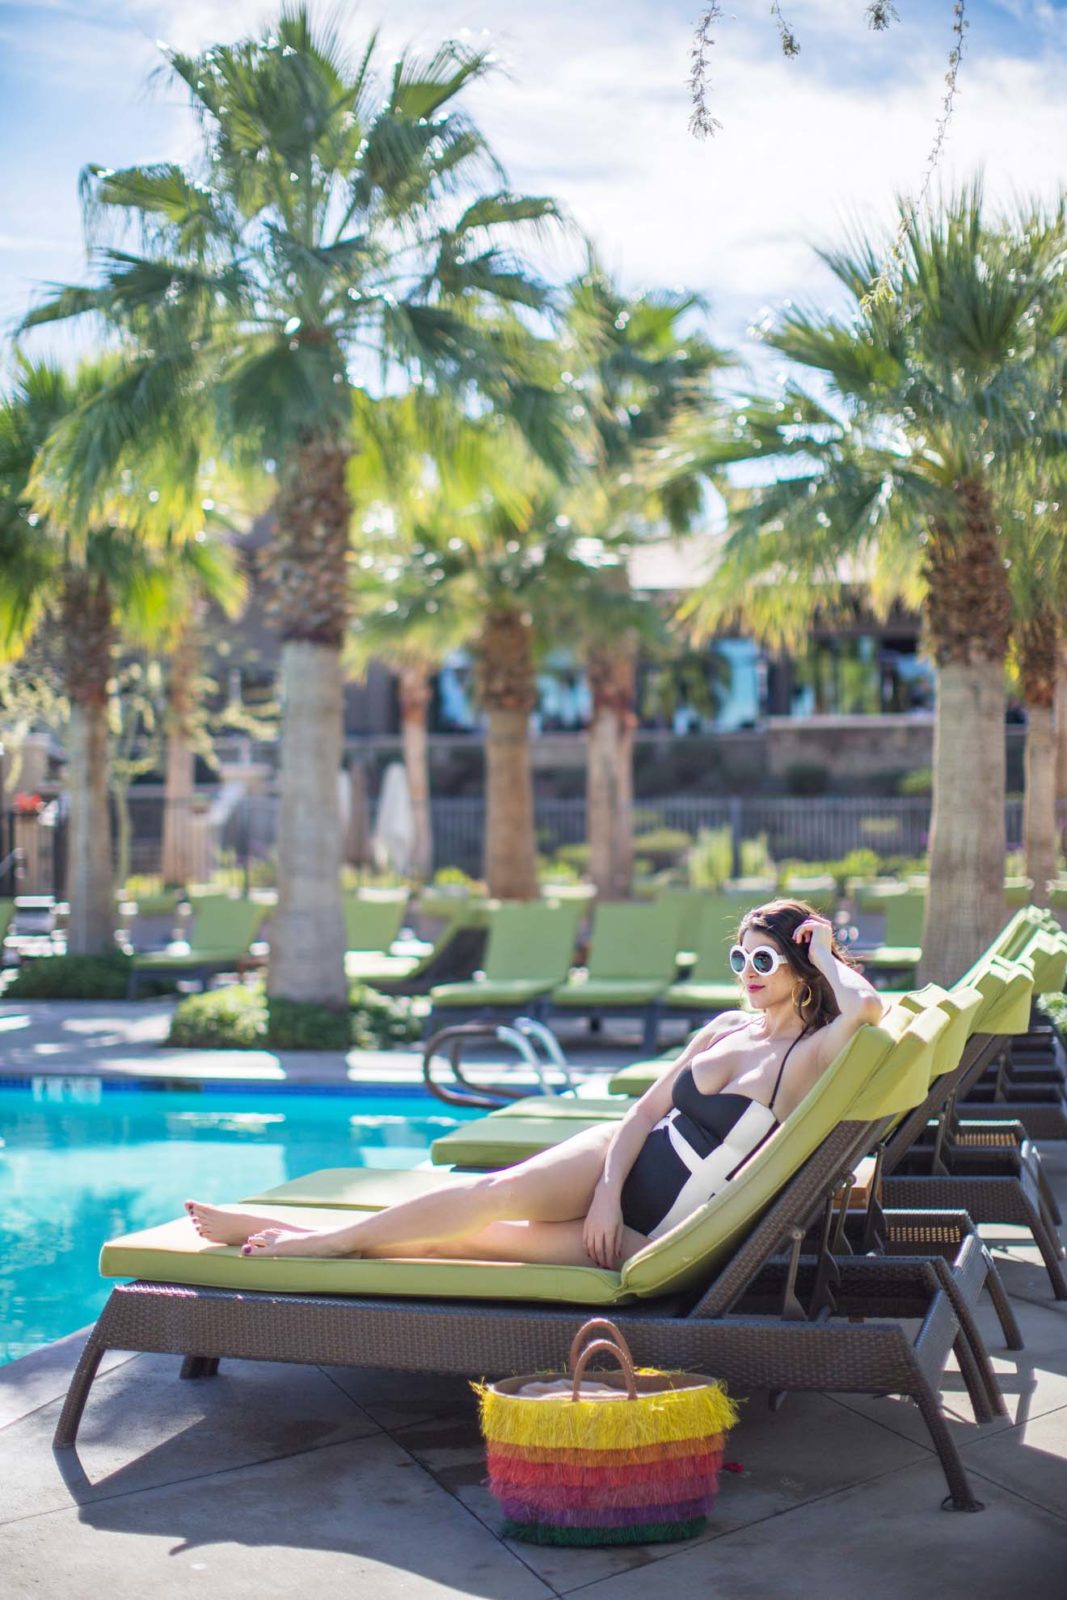 The Ritz-Carlton Rancho Mirage, Laura Lily Fashion Travel and Lifestyle Blog, Best Hotels in Palm Desert, - The Ritz-Carlton, Rancho Mirage Review by popular San Diego travel blogger Laura Lily